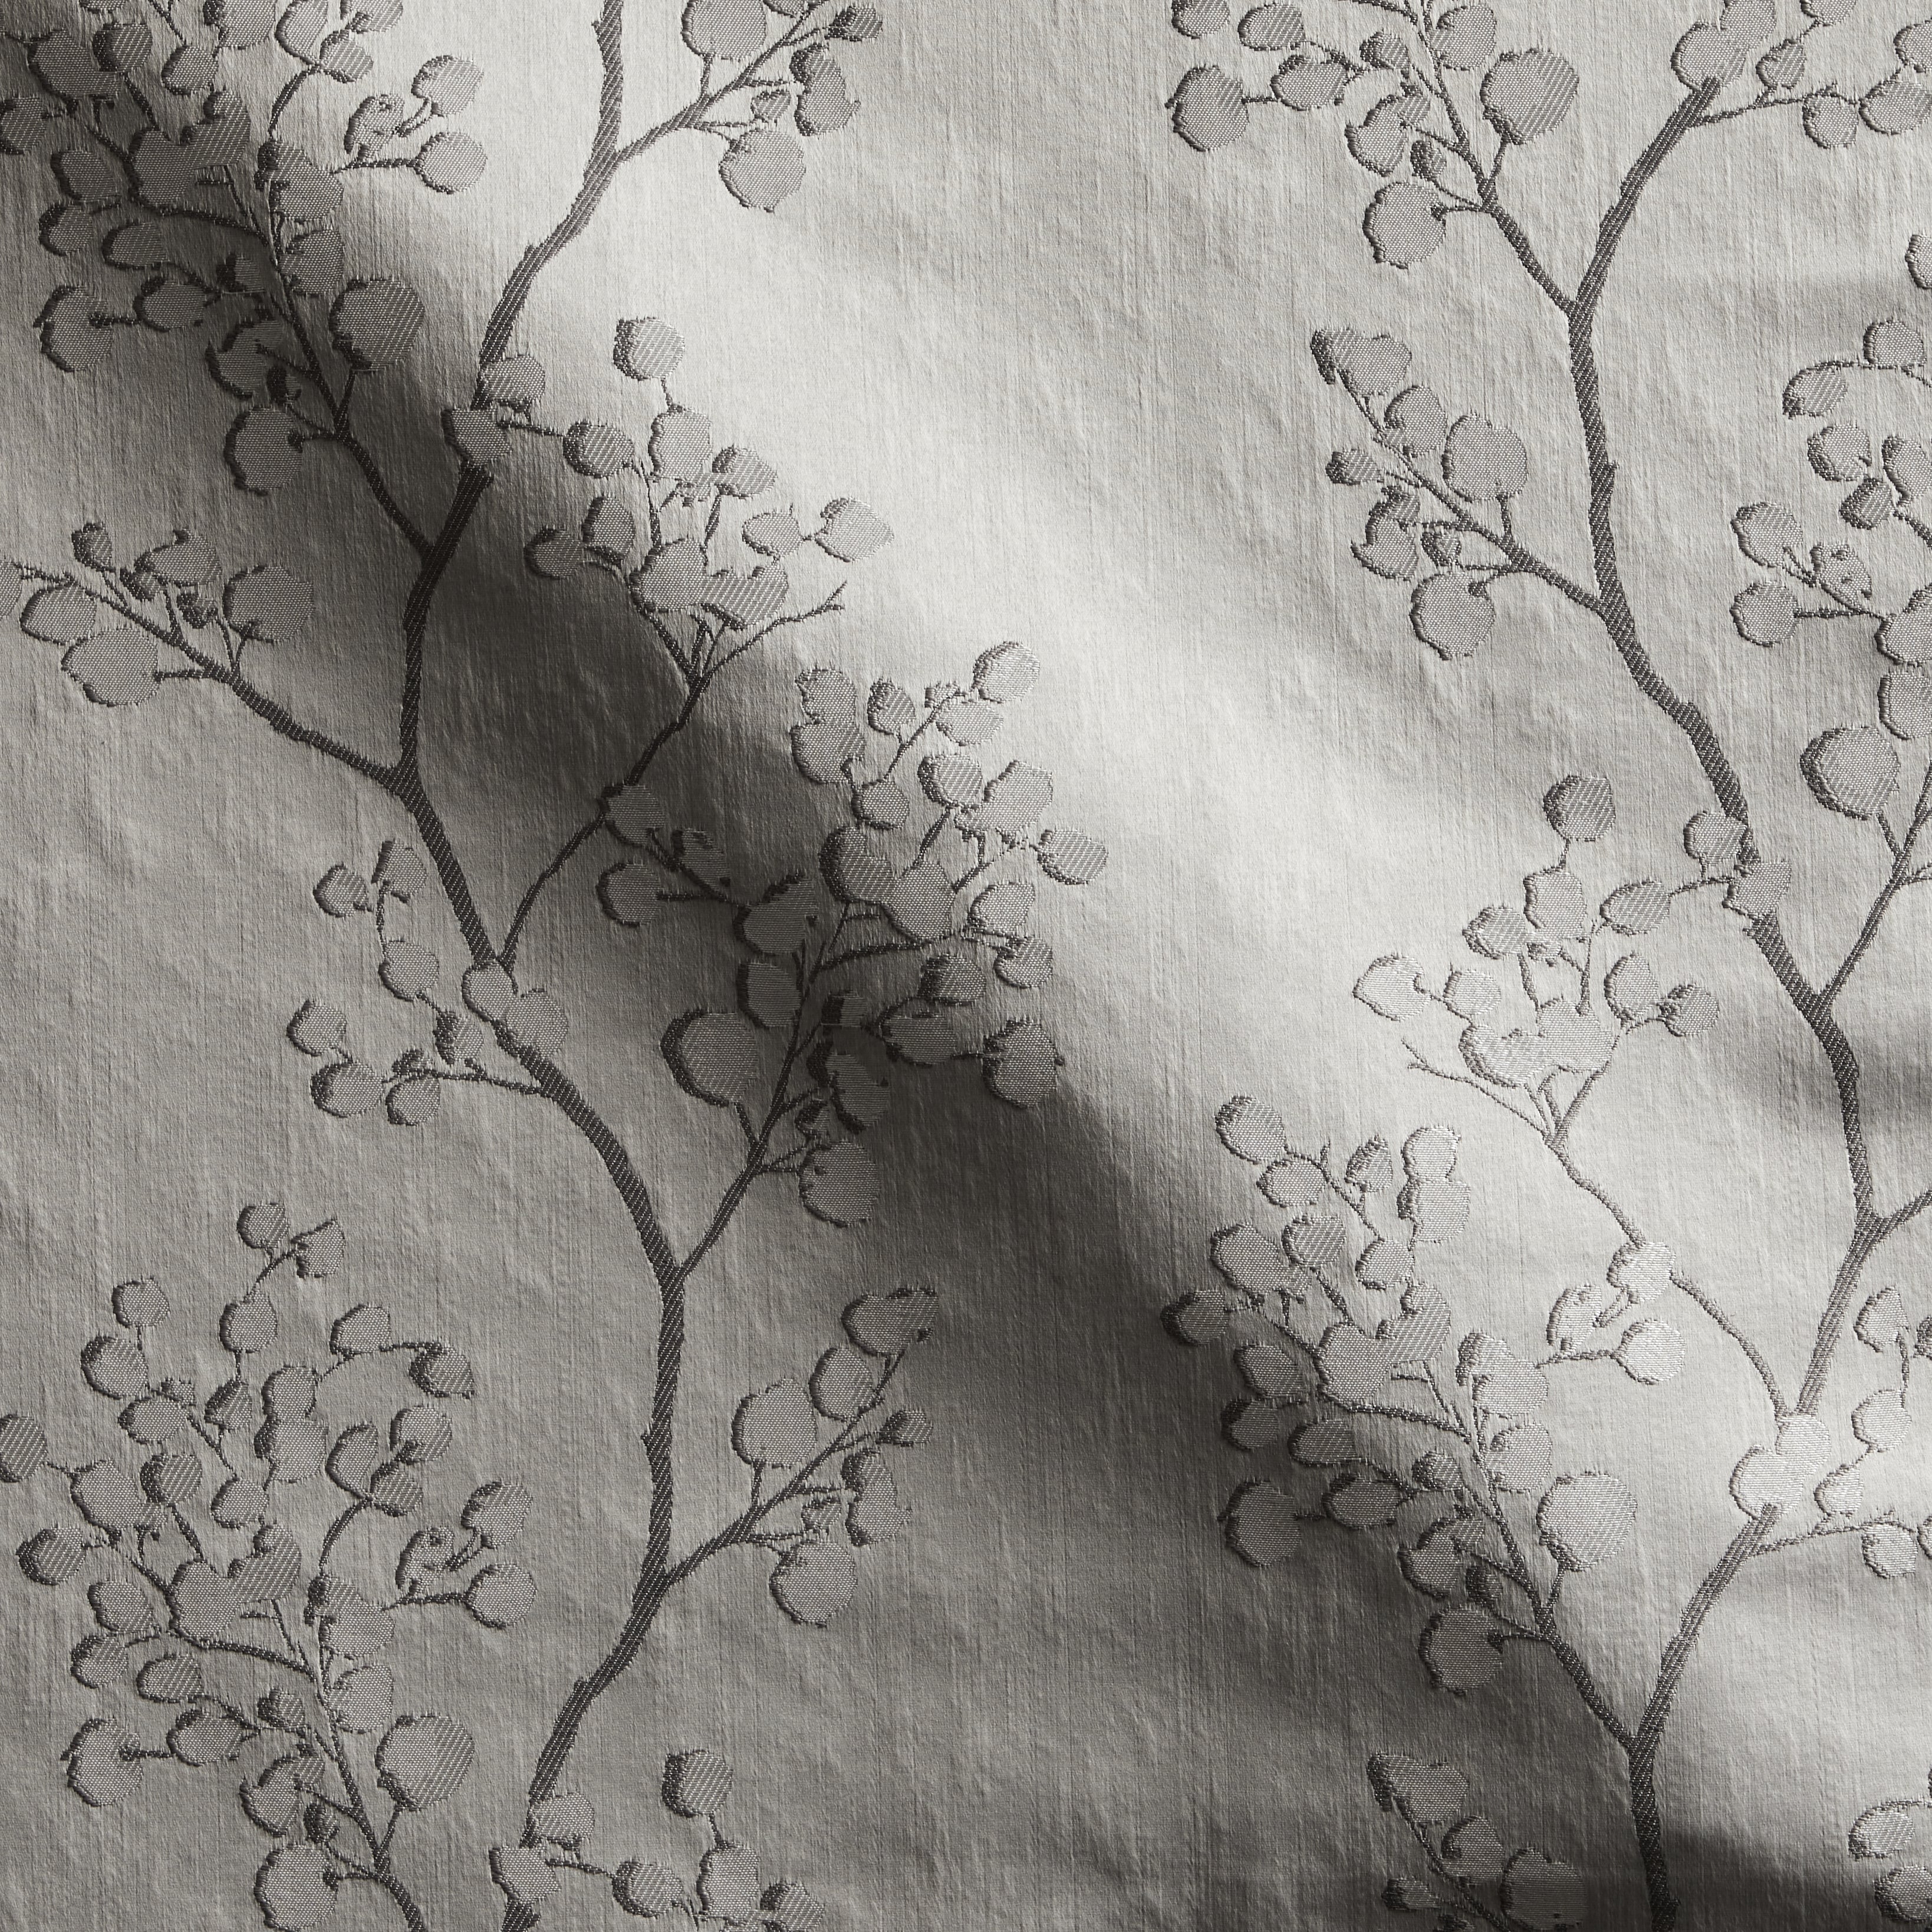 Blickling Made to Measure Curtains Blickling Silver